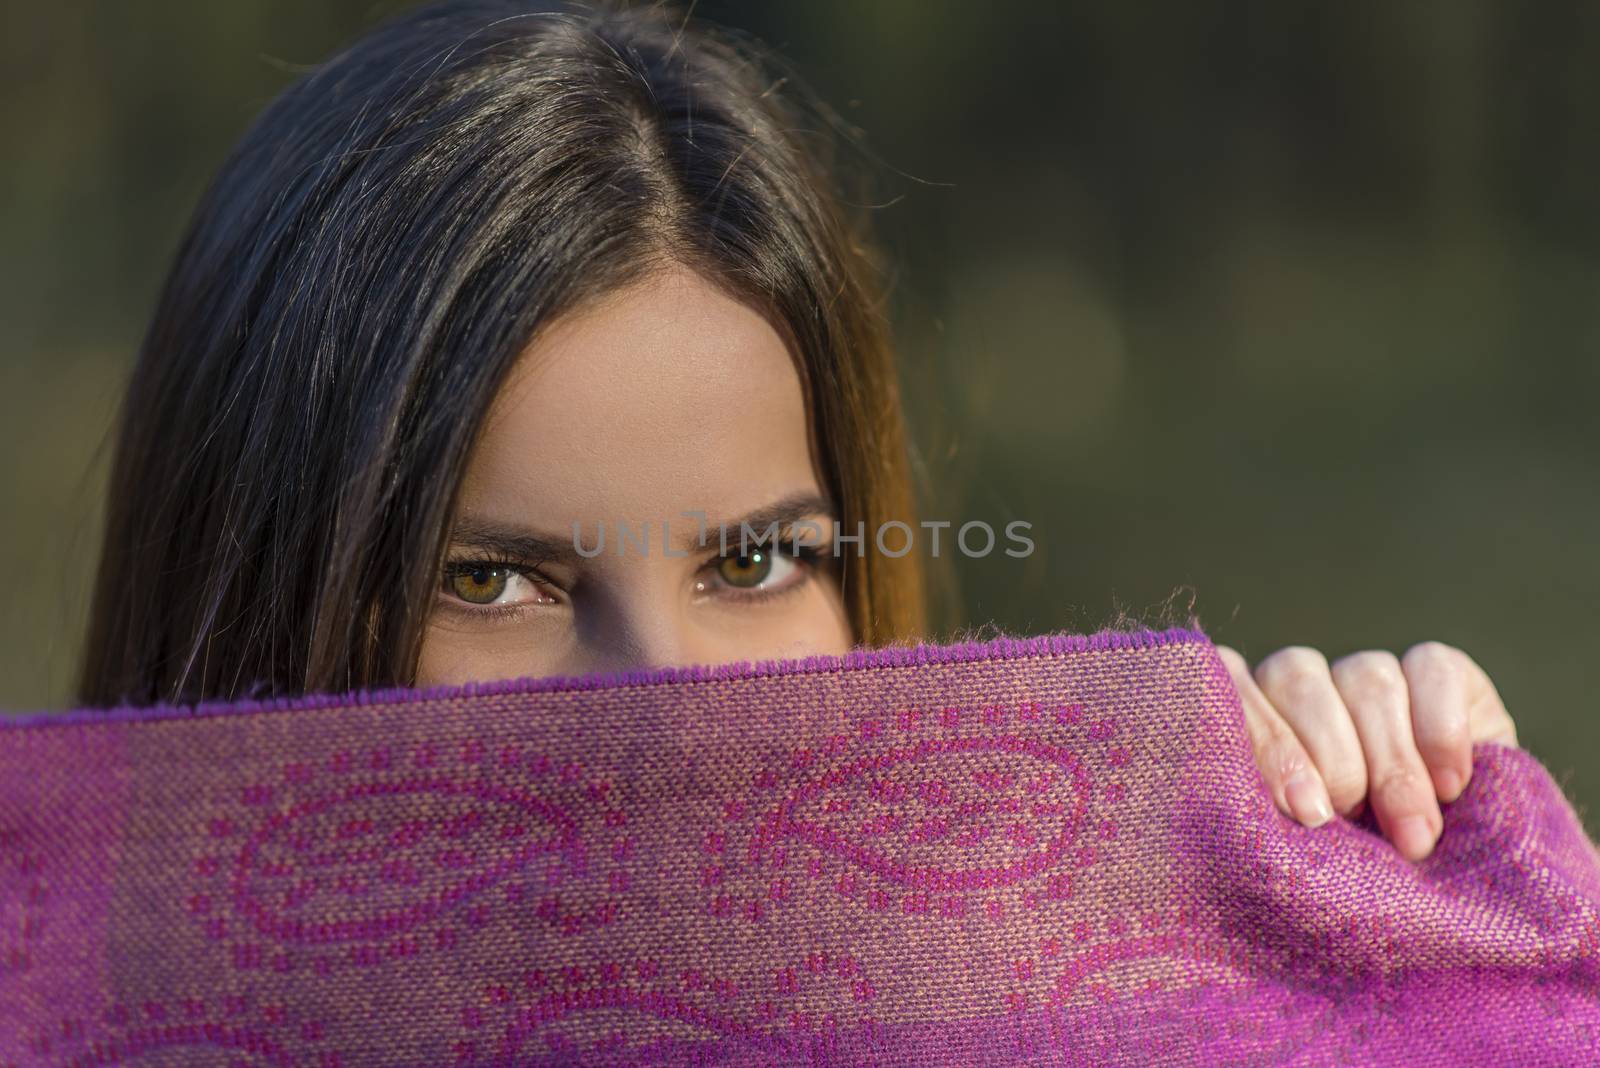 Eyes above the purple scarf. by Mihail_P